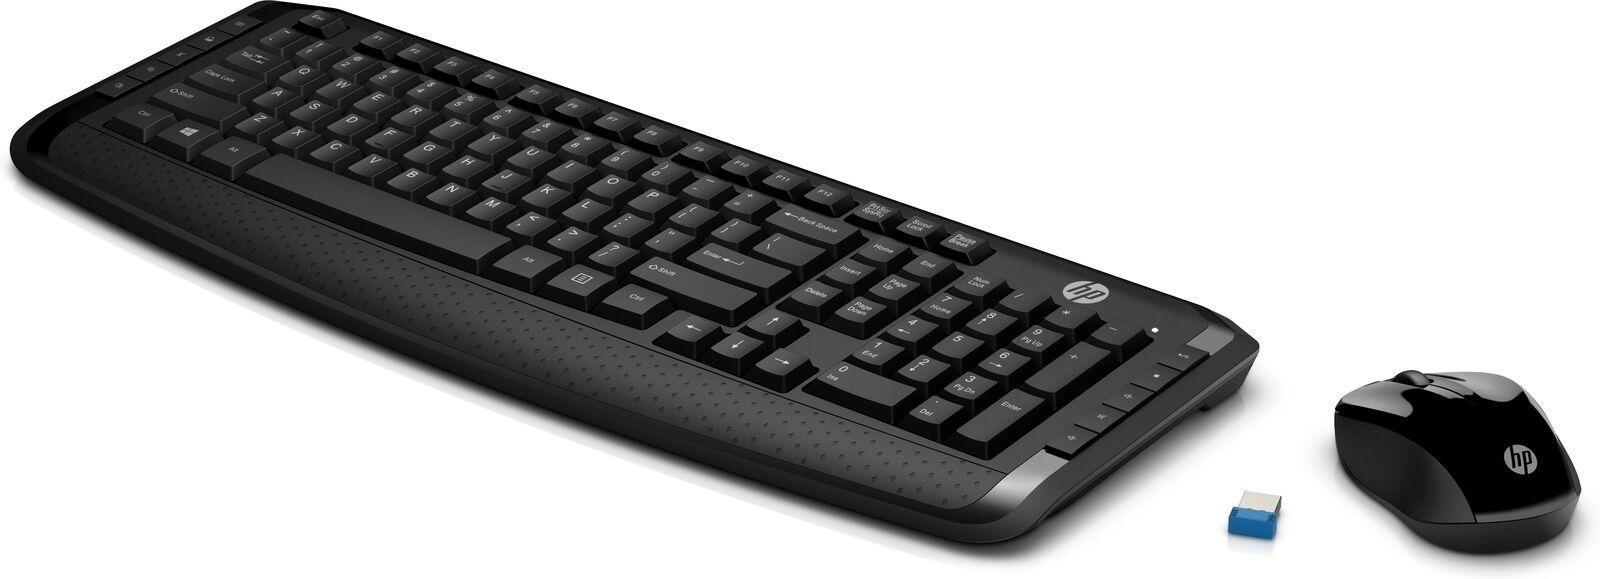 HP Wireless Keyboard and Mouse 300 for $10.99 Shipped